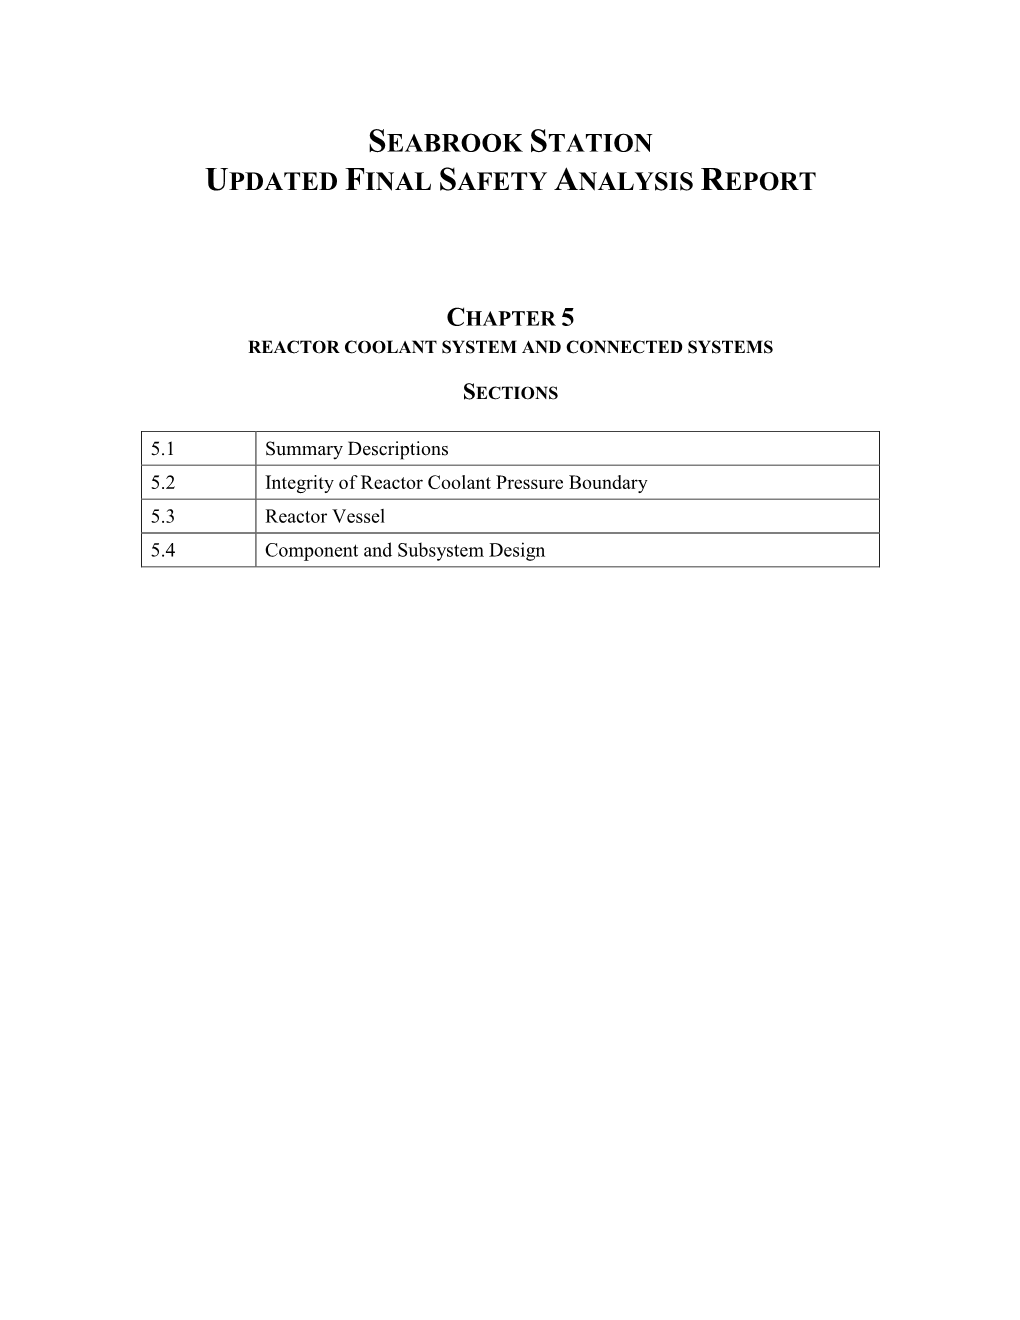 Seabrook Station Revision 18 to Updated Final Safety Analysis